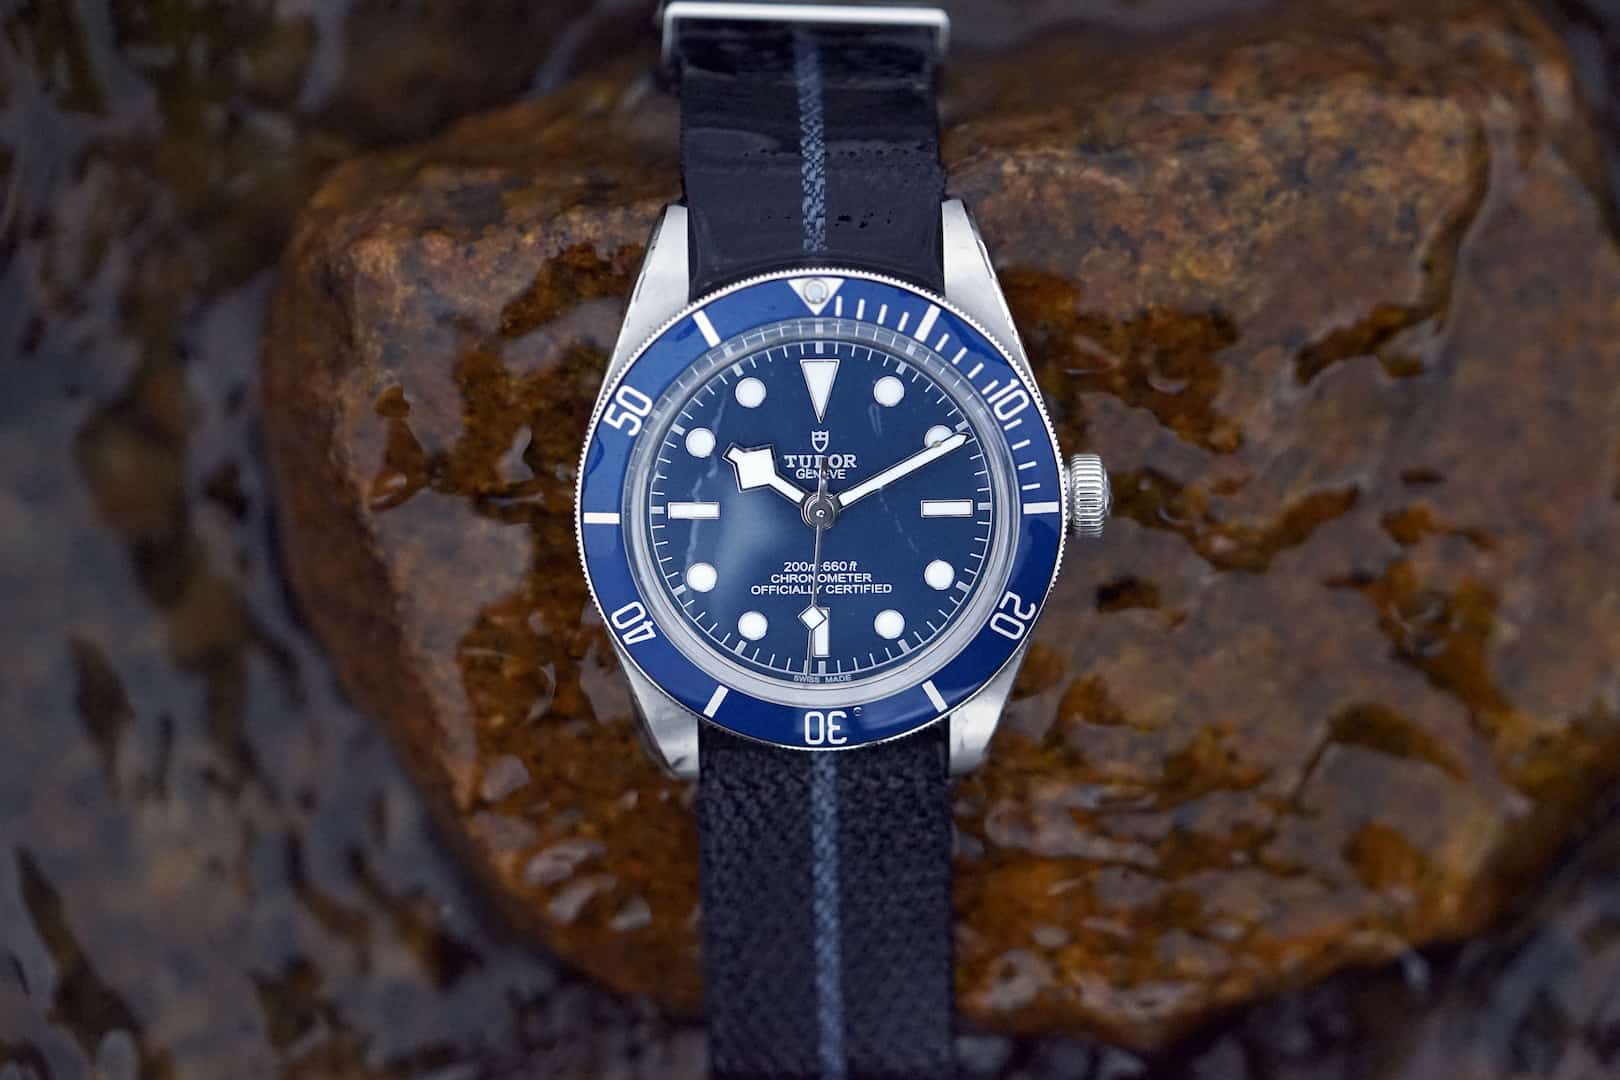 New in town: the Tudor Black Bay Fifty-Eight